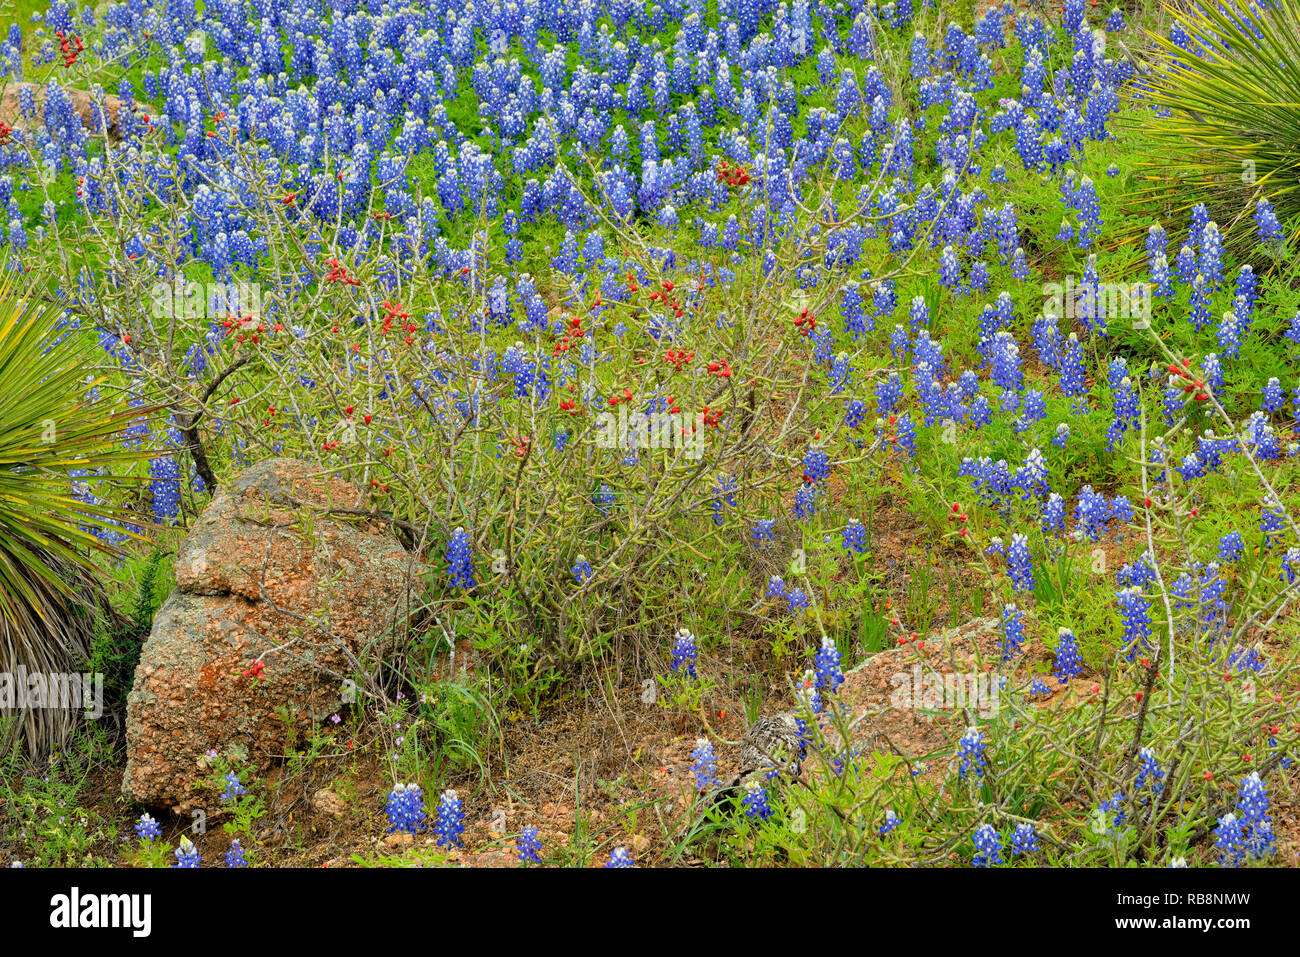 Flowering Texas bluebonnets with yucca and cholla in arid rocky habitat, Willow City Loop, Gillespie County, Texas, USA Stock Photo